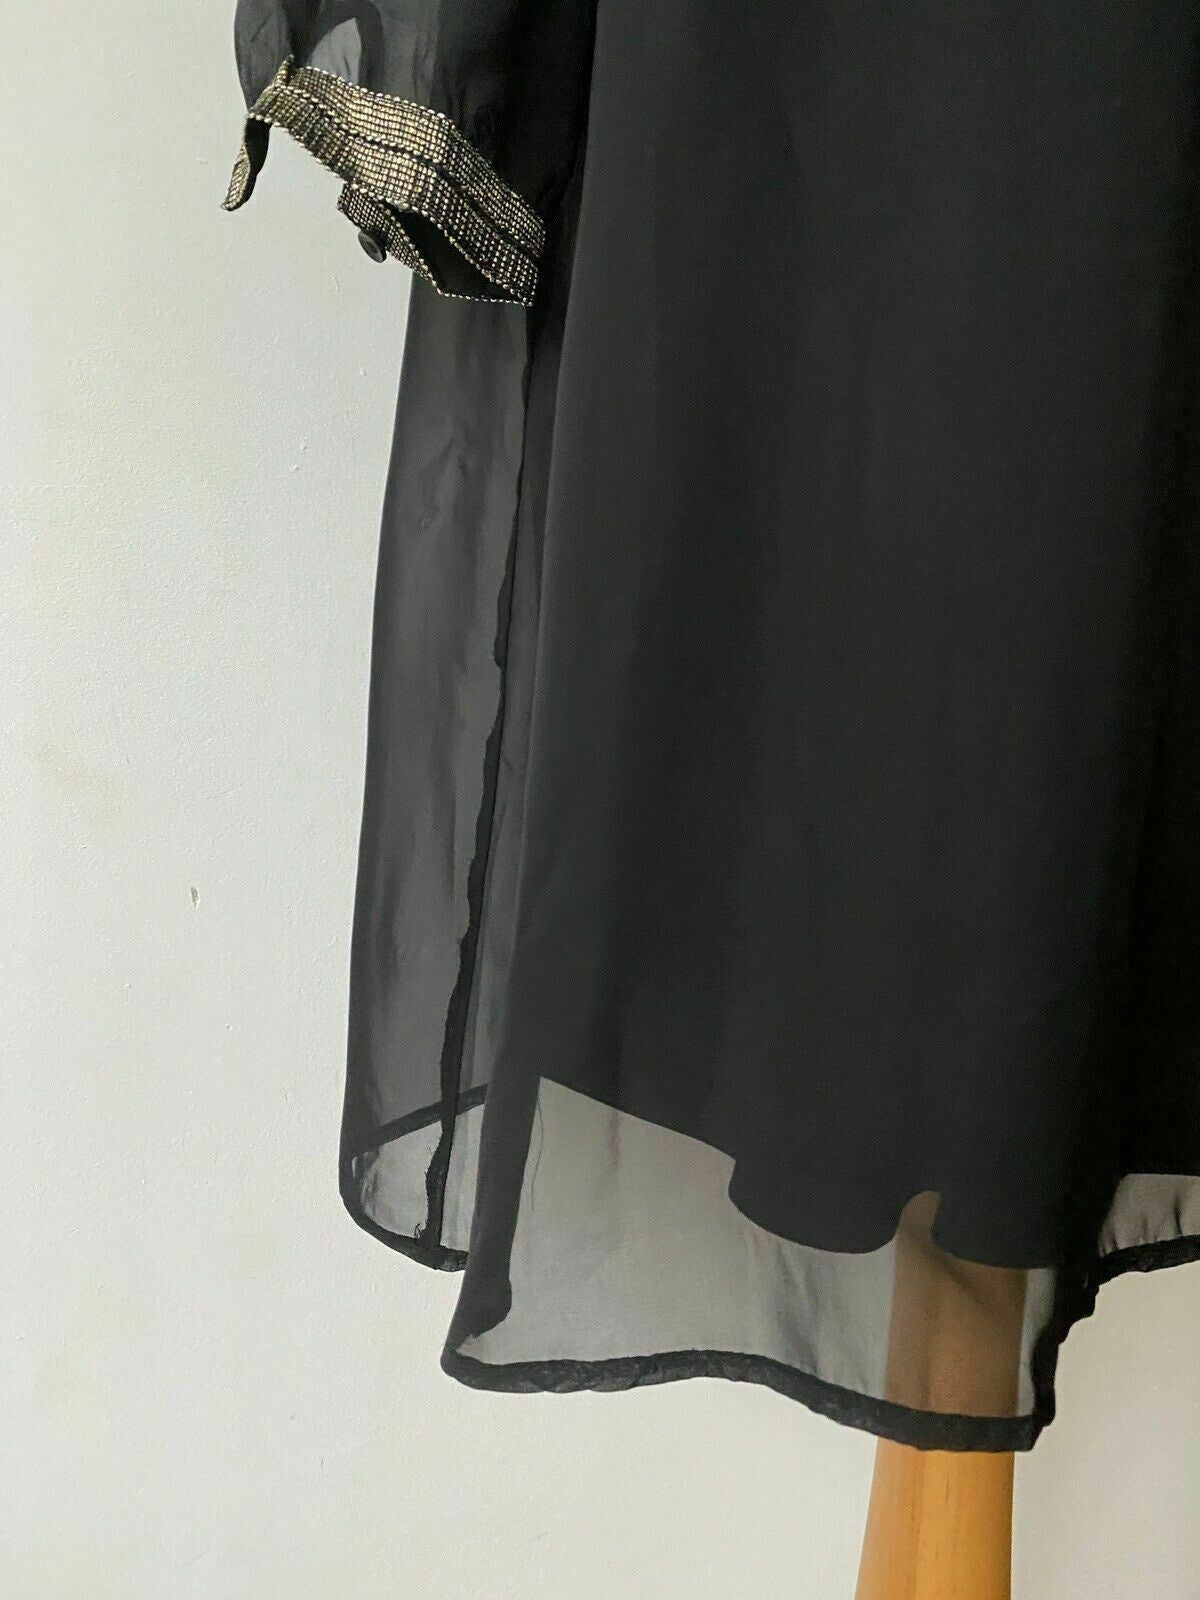 ONLY Sharon Long Sleeve Black Dress Size 10 embellished gold cuffs